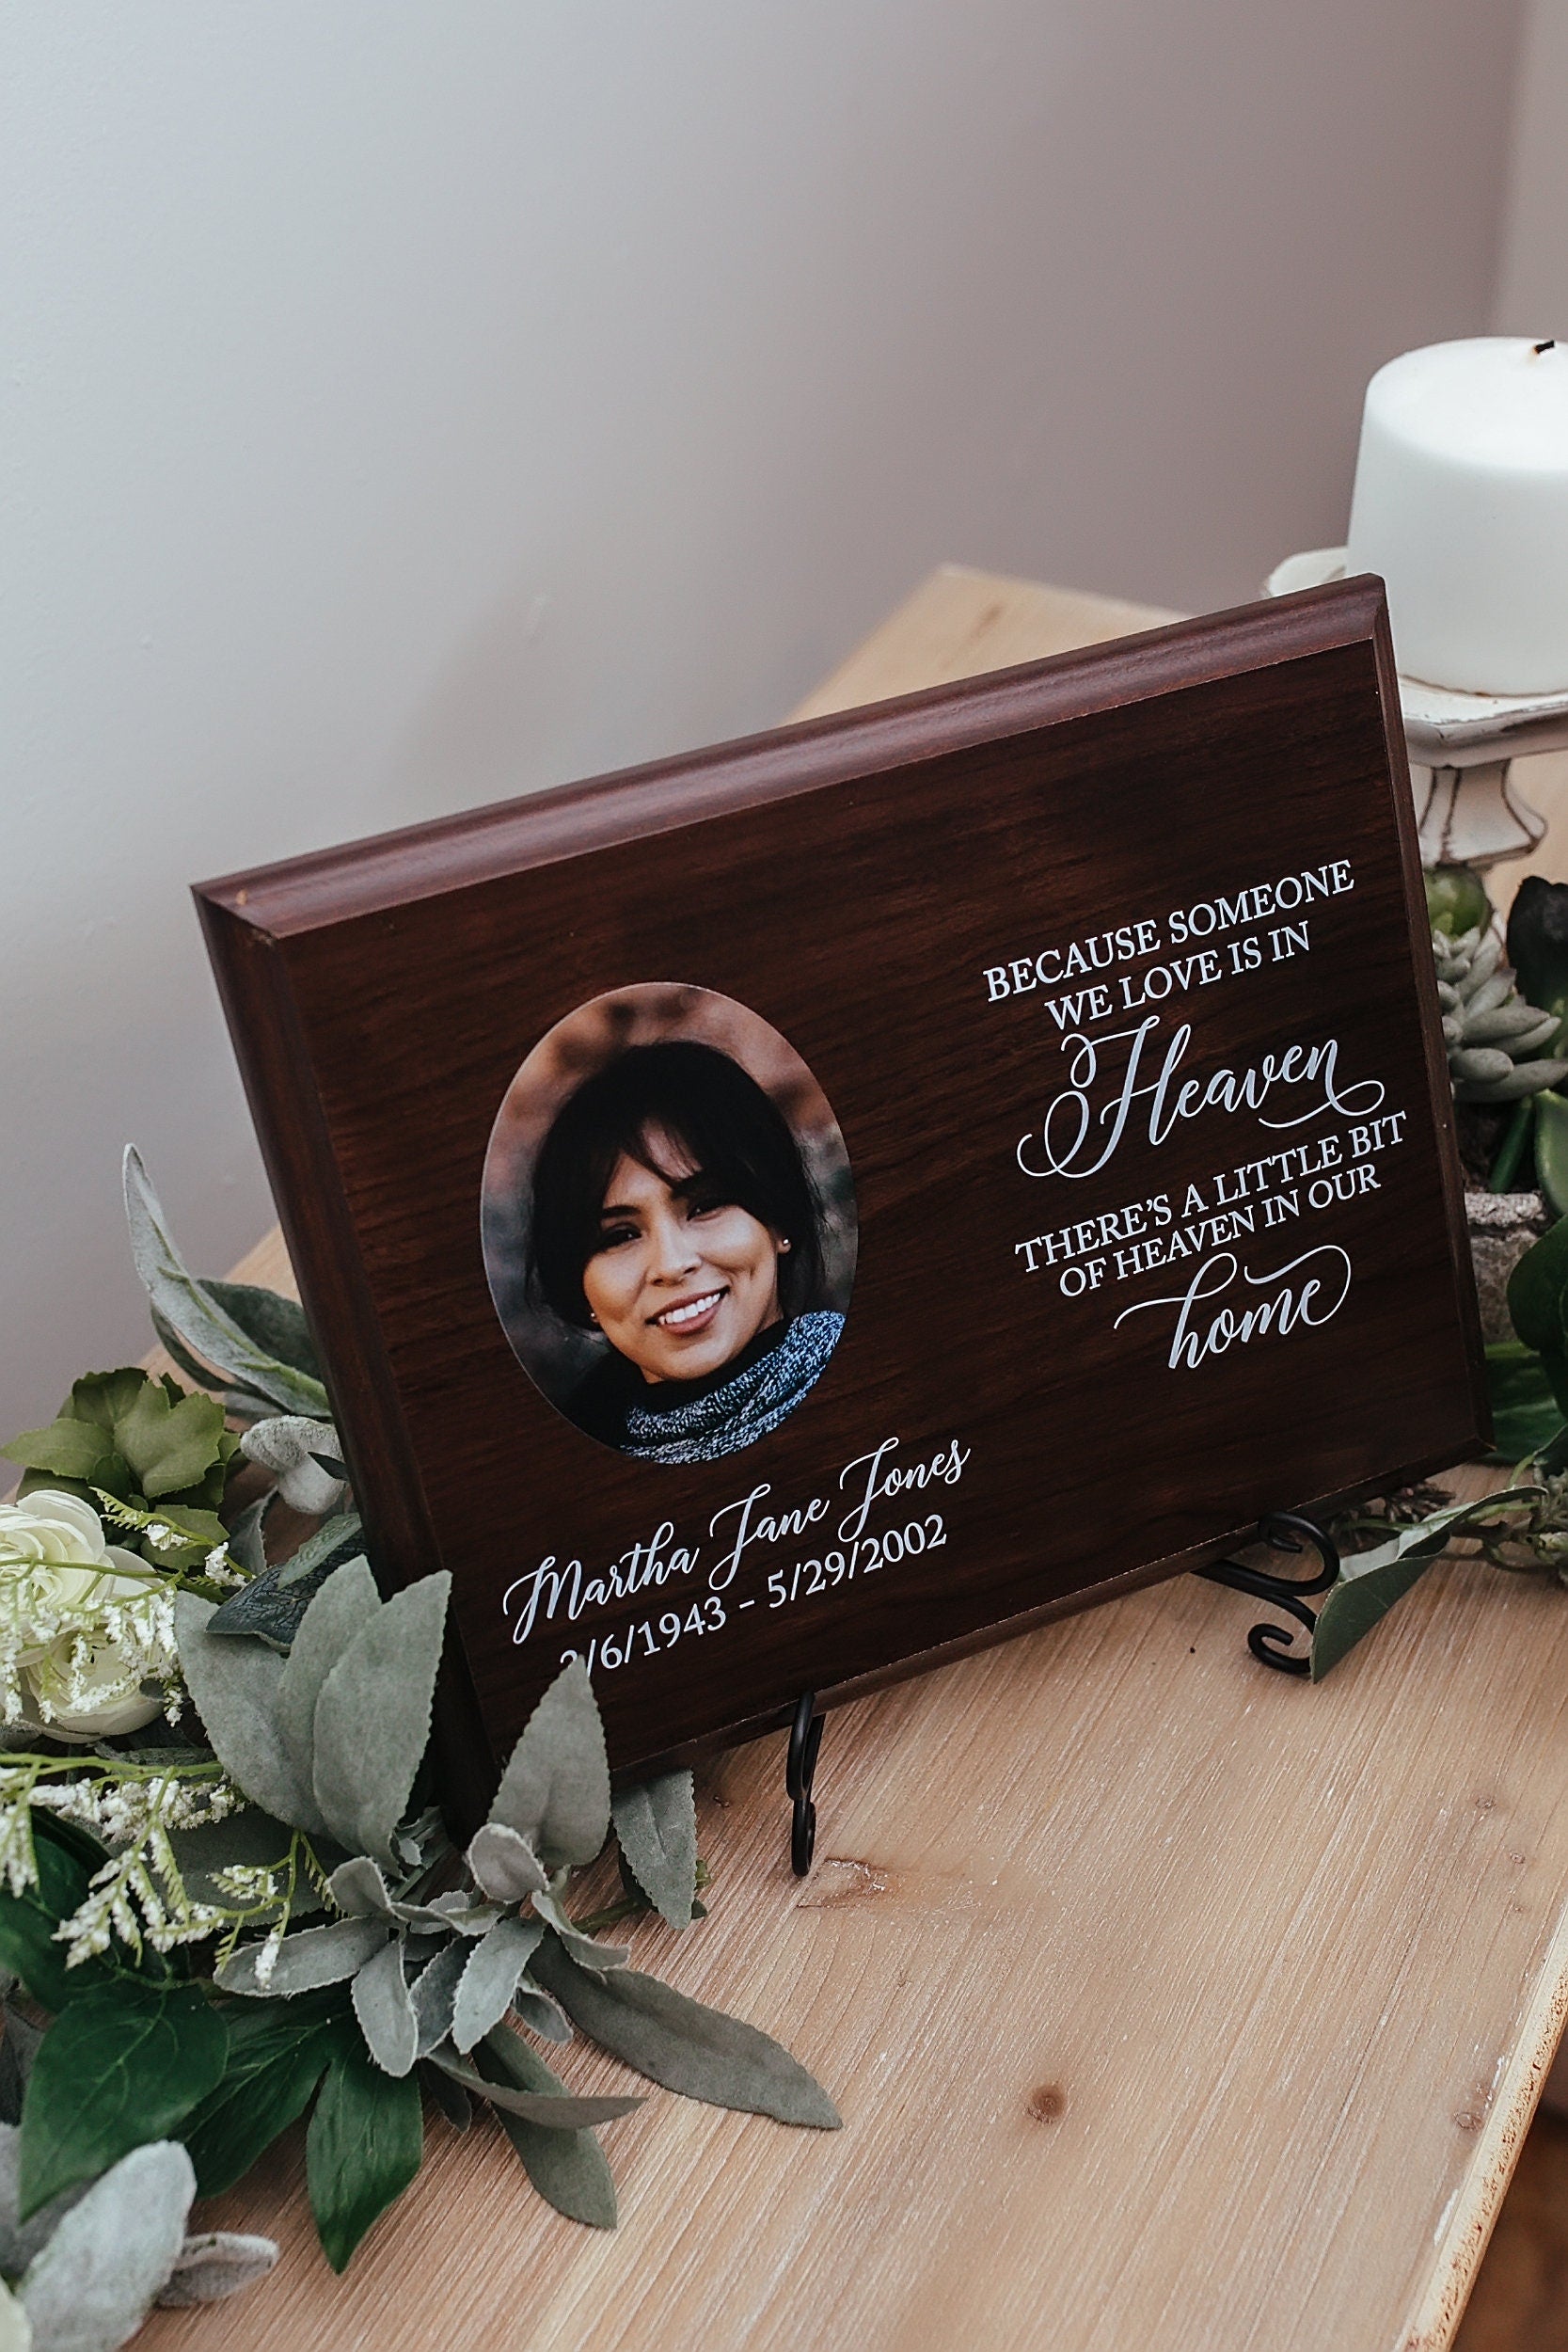 Because Someone We Love Is In Heaven Sympathy Photo Gift Memorial Plaque, Loving Memory Present, Grief, Remembrance Bereavement Condolences